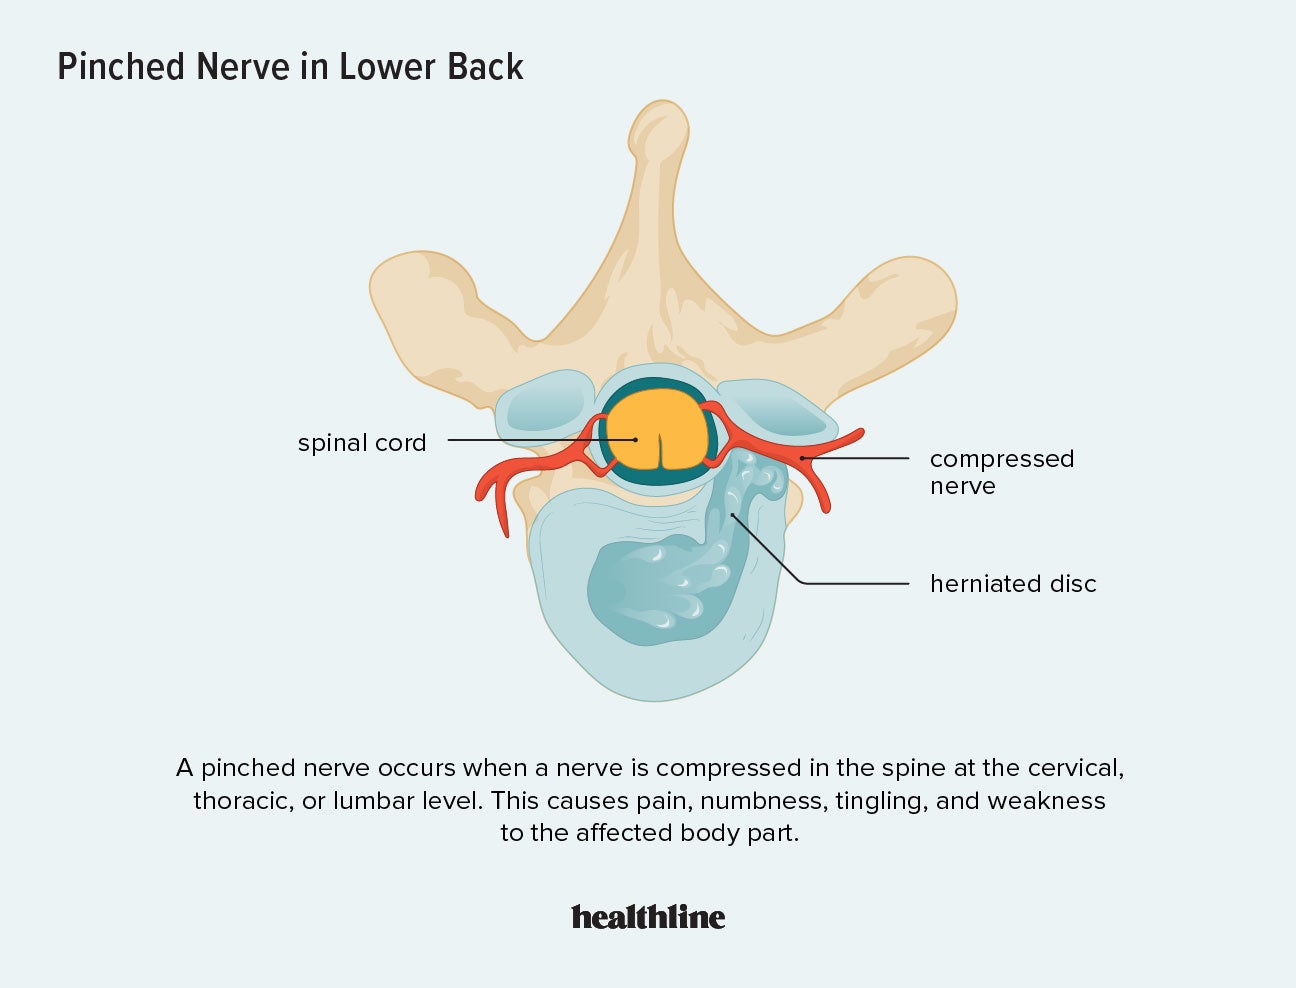 https://post.healthline.com/wp-content/uploads/2021/12/1791302-Pinched-Nerve-in-the-Lower-Back-What-to-Know-1296x988-Body-1.jpg